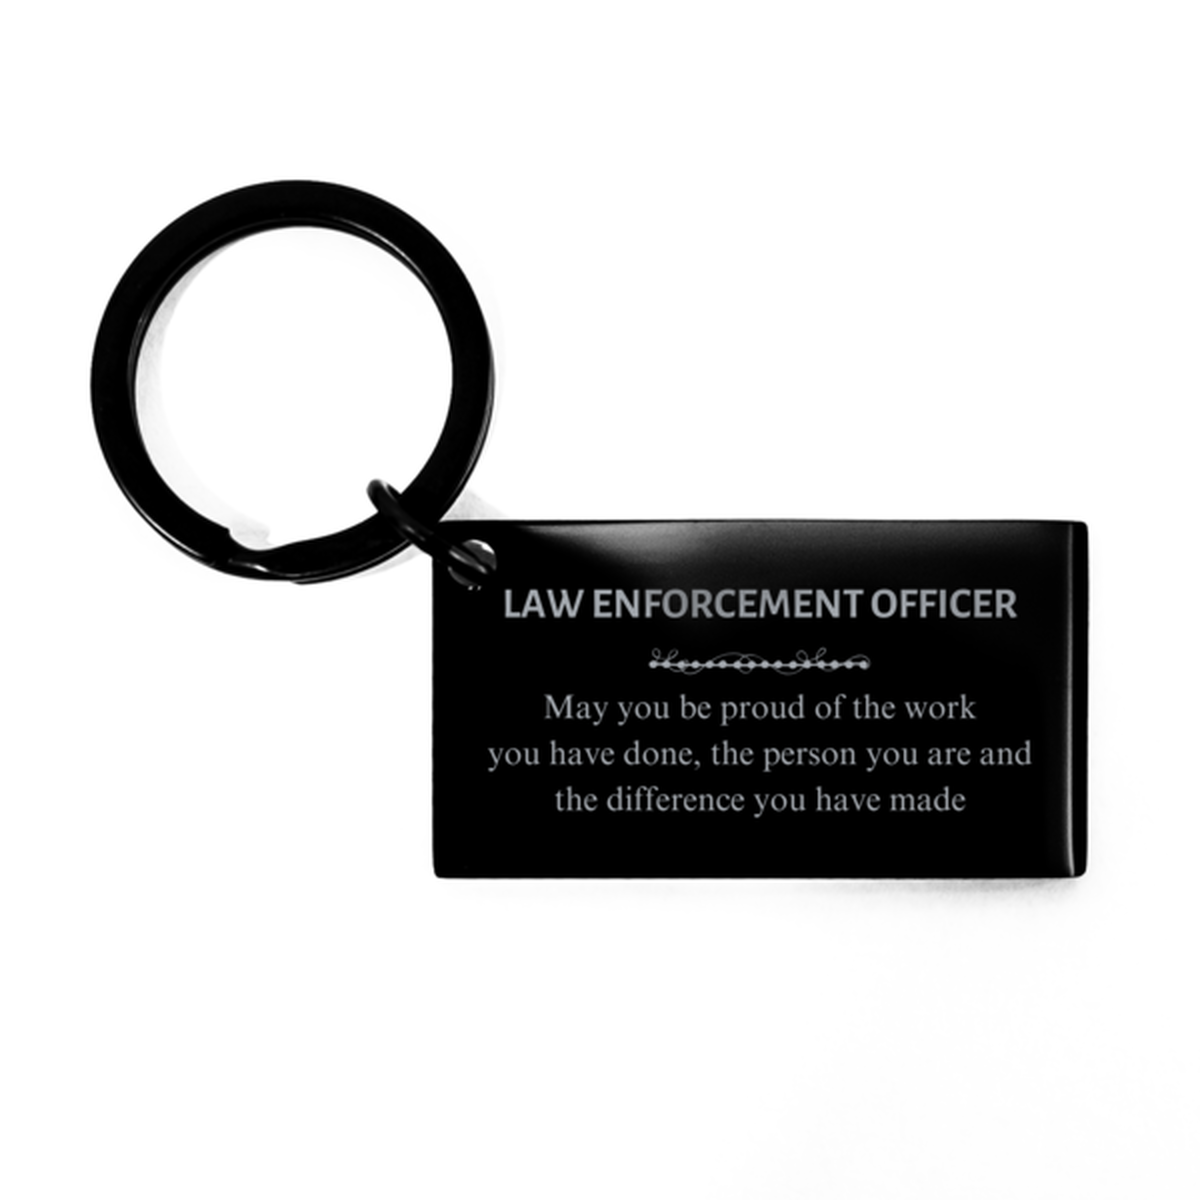 Naval Architect May you be proud of the work you have done, Retirement Law Enforcement Officer Keychain for Colleague Appreciation Gifts Amazing for Law Enforcement Officer